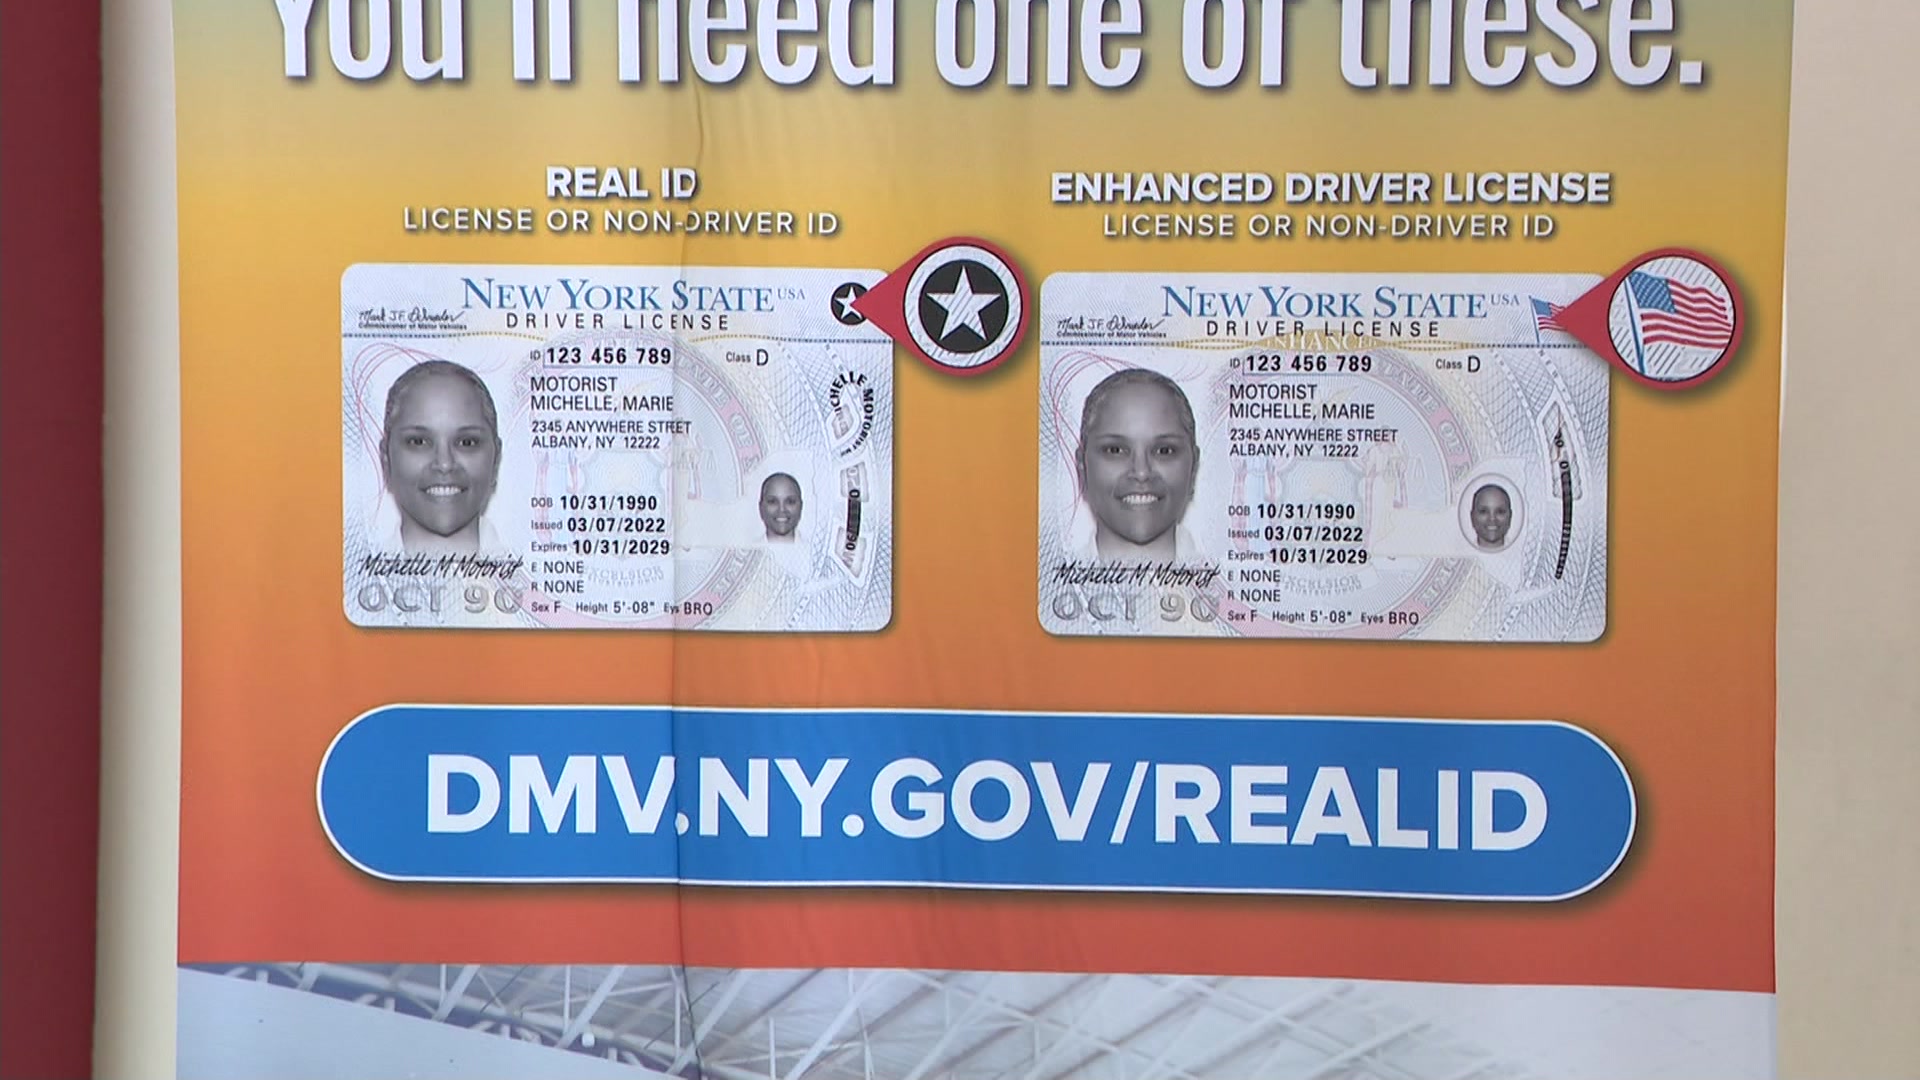 NO FLY Don't have a REAL ID or Enhanced ID driver's license? You may